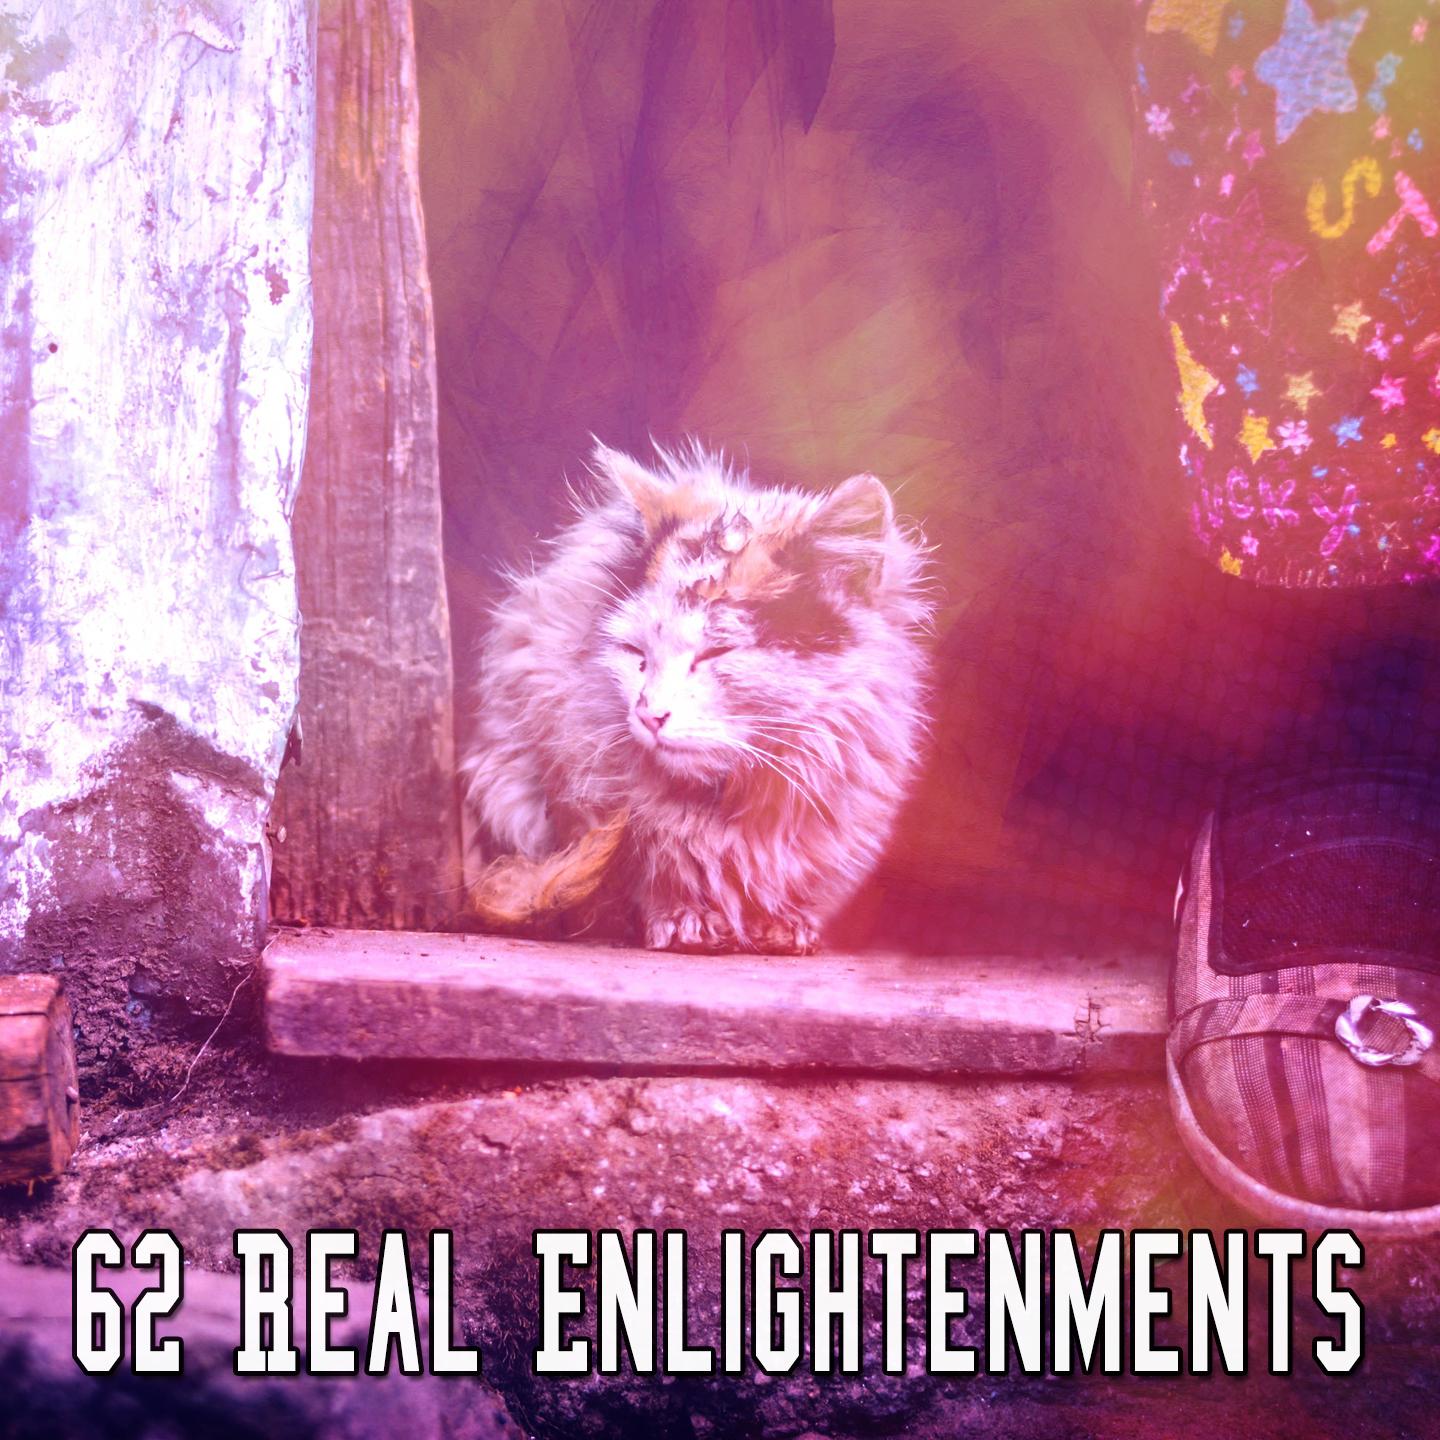 62 Real Enlightenments